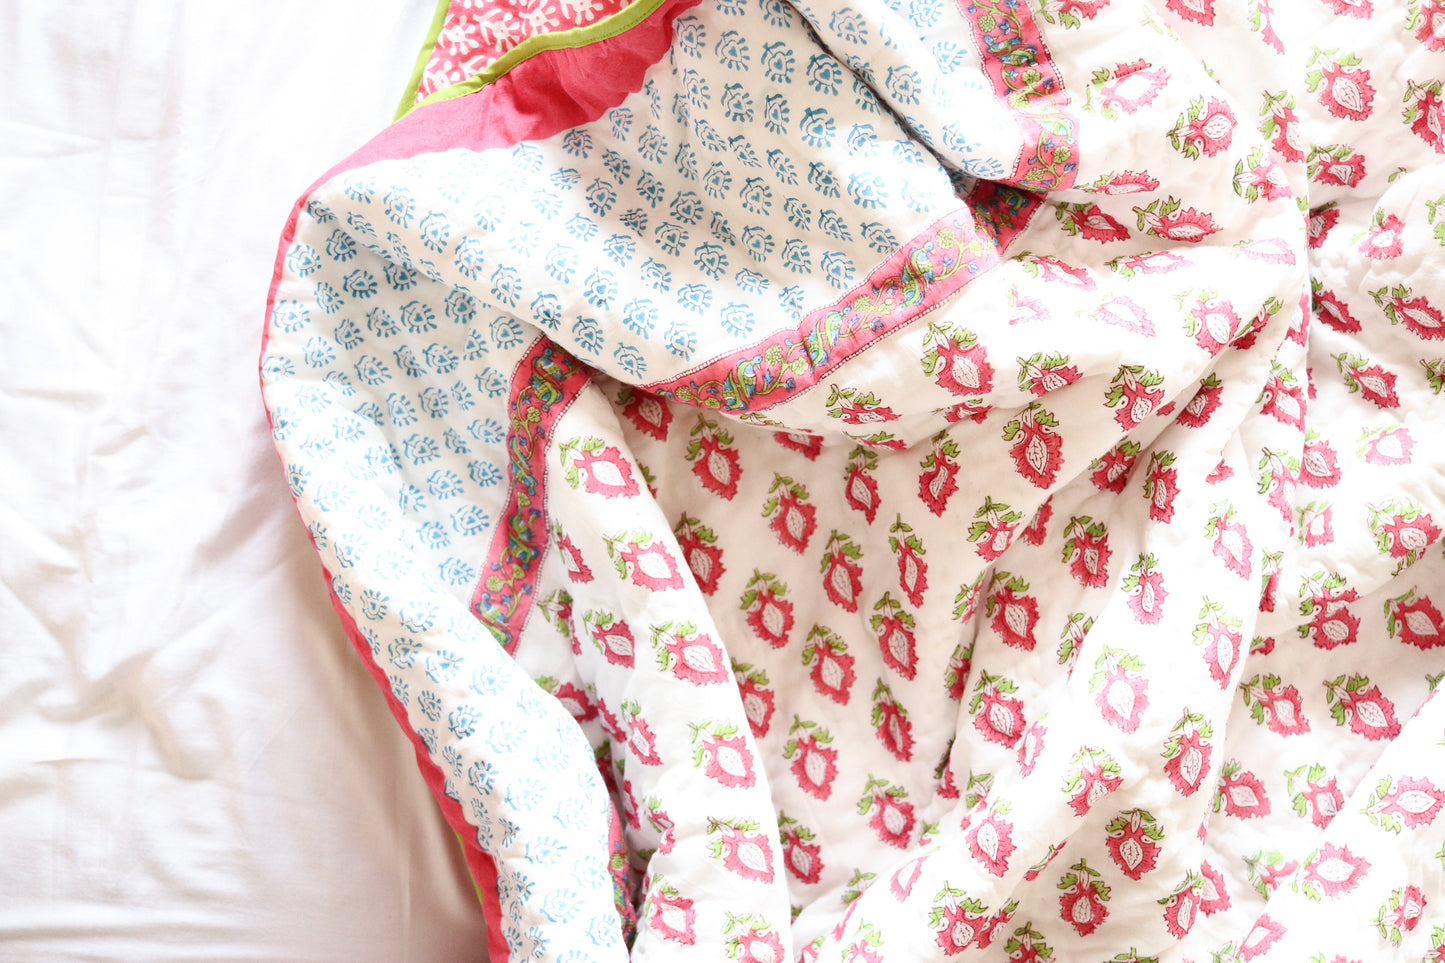 Boho Pink quilt - Pink and turquoise AC quilt - Single, Queen, King size